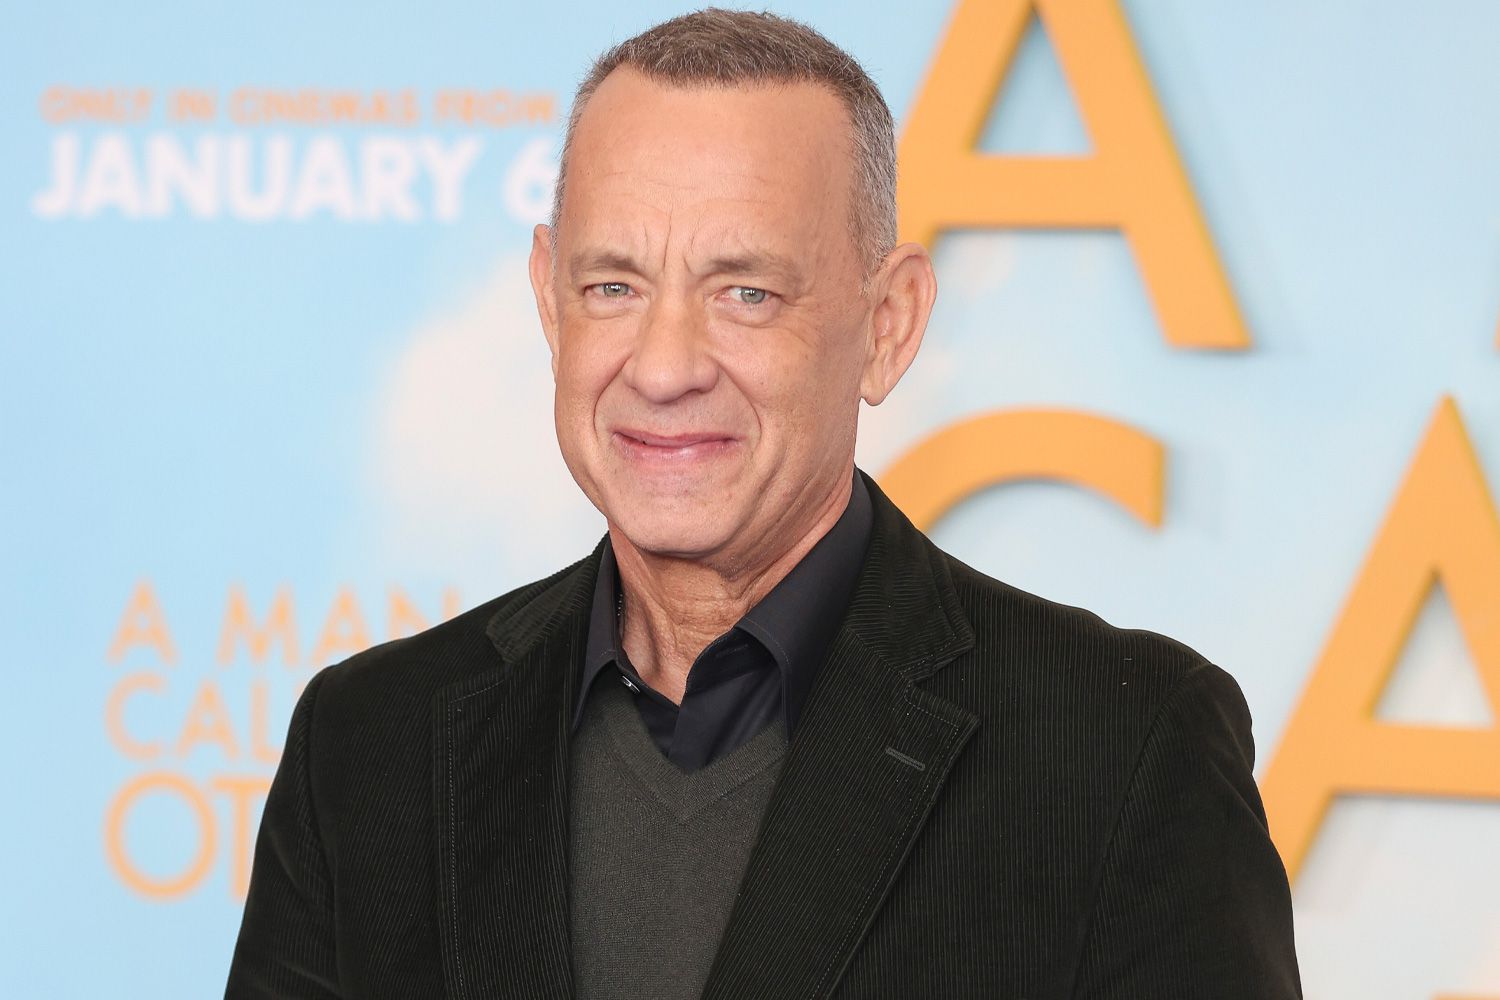 Tom Hanks promoting his recent film 'A Man Called Otto'